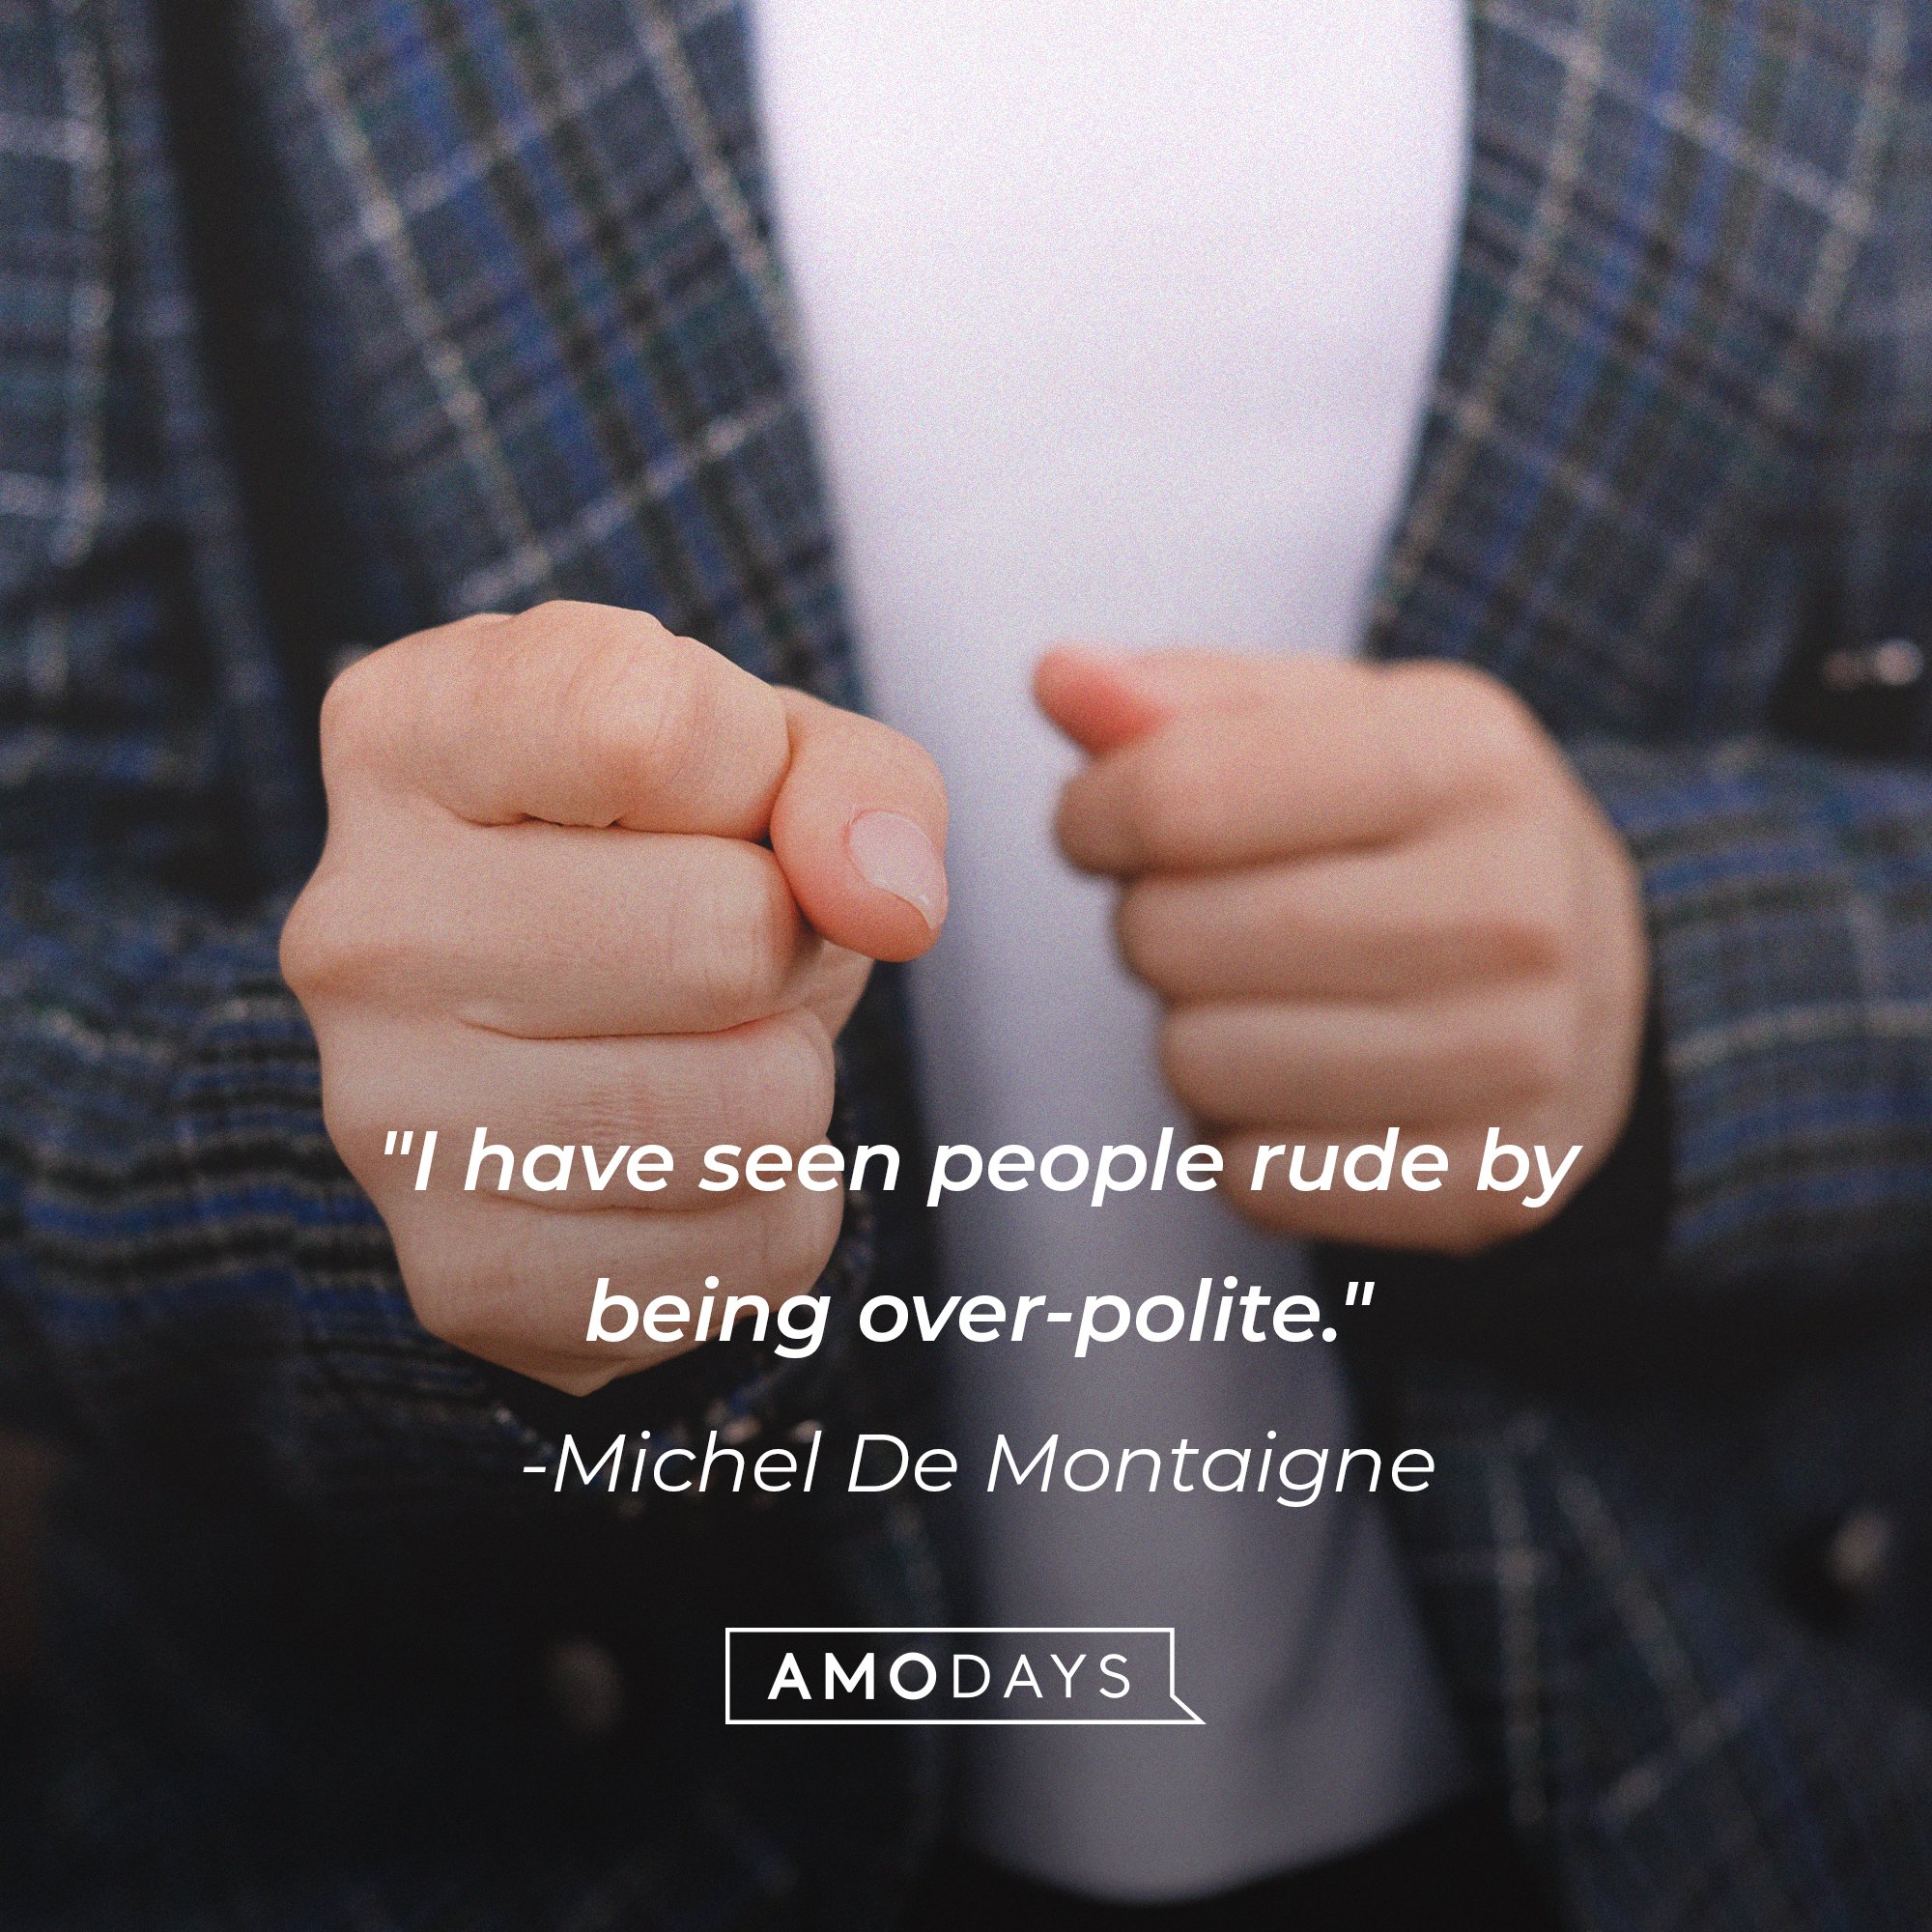 Michel De Montaigne’s quote: "I have seen people rude by being over-polite." | Image: AmoDays